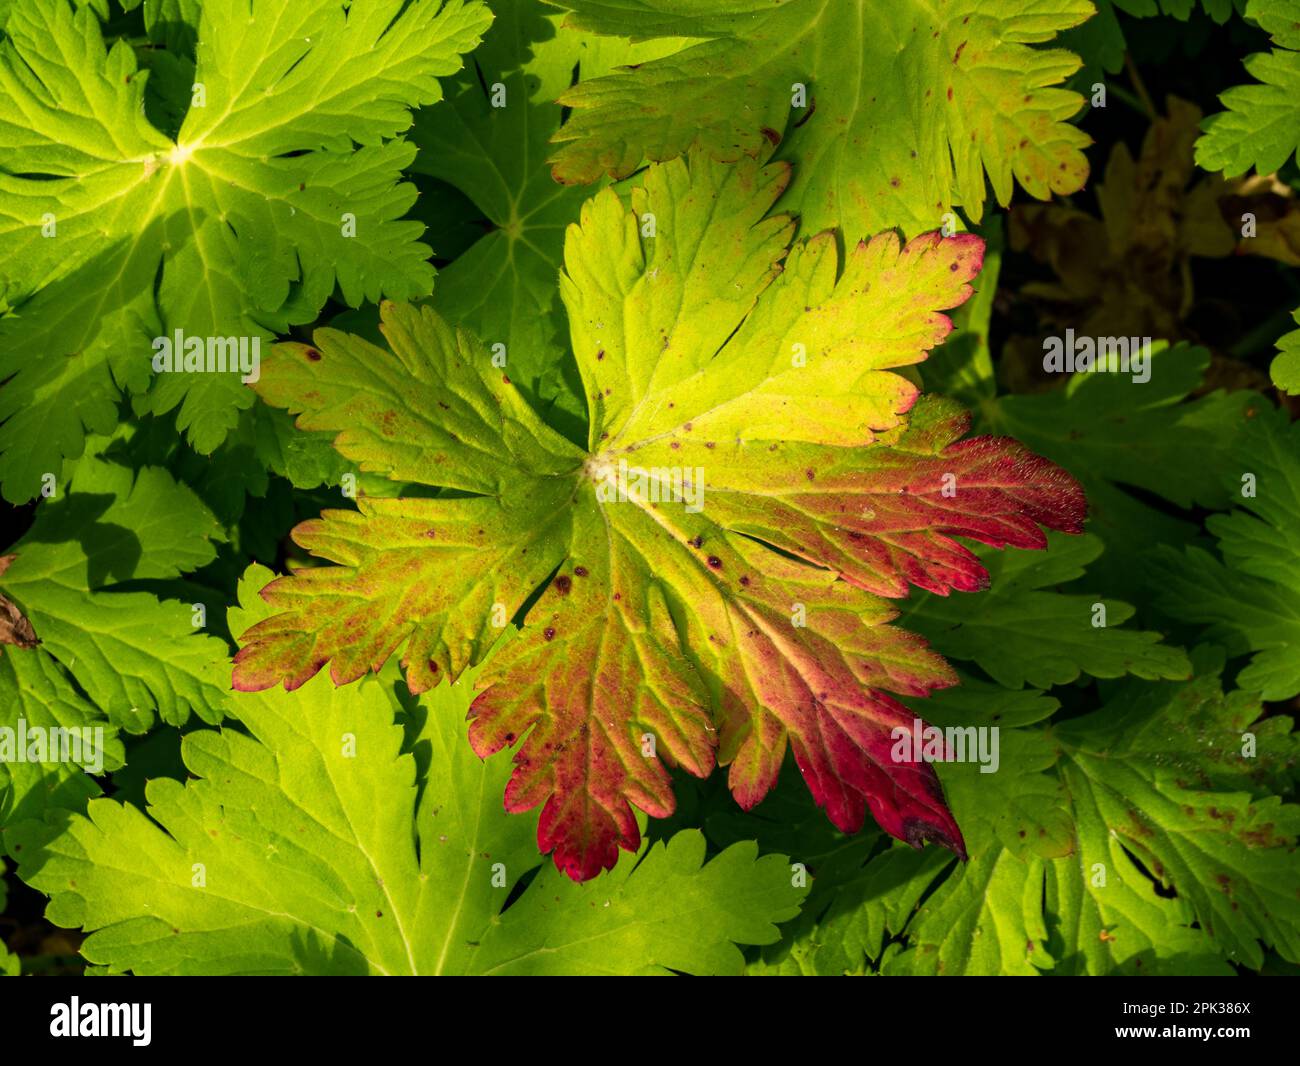 Garden lady's mantle, Alchemilla mollis, leaf in autumn colours green, yellow and red Stock Photo